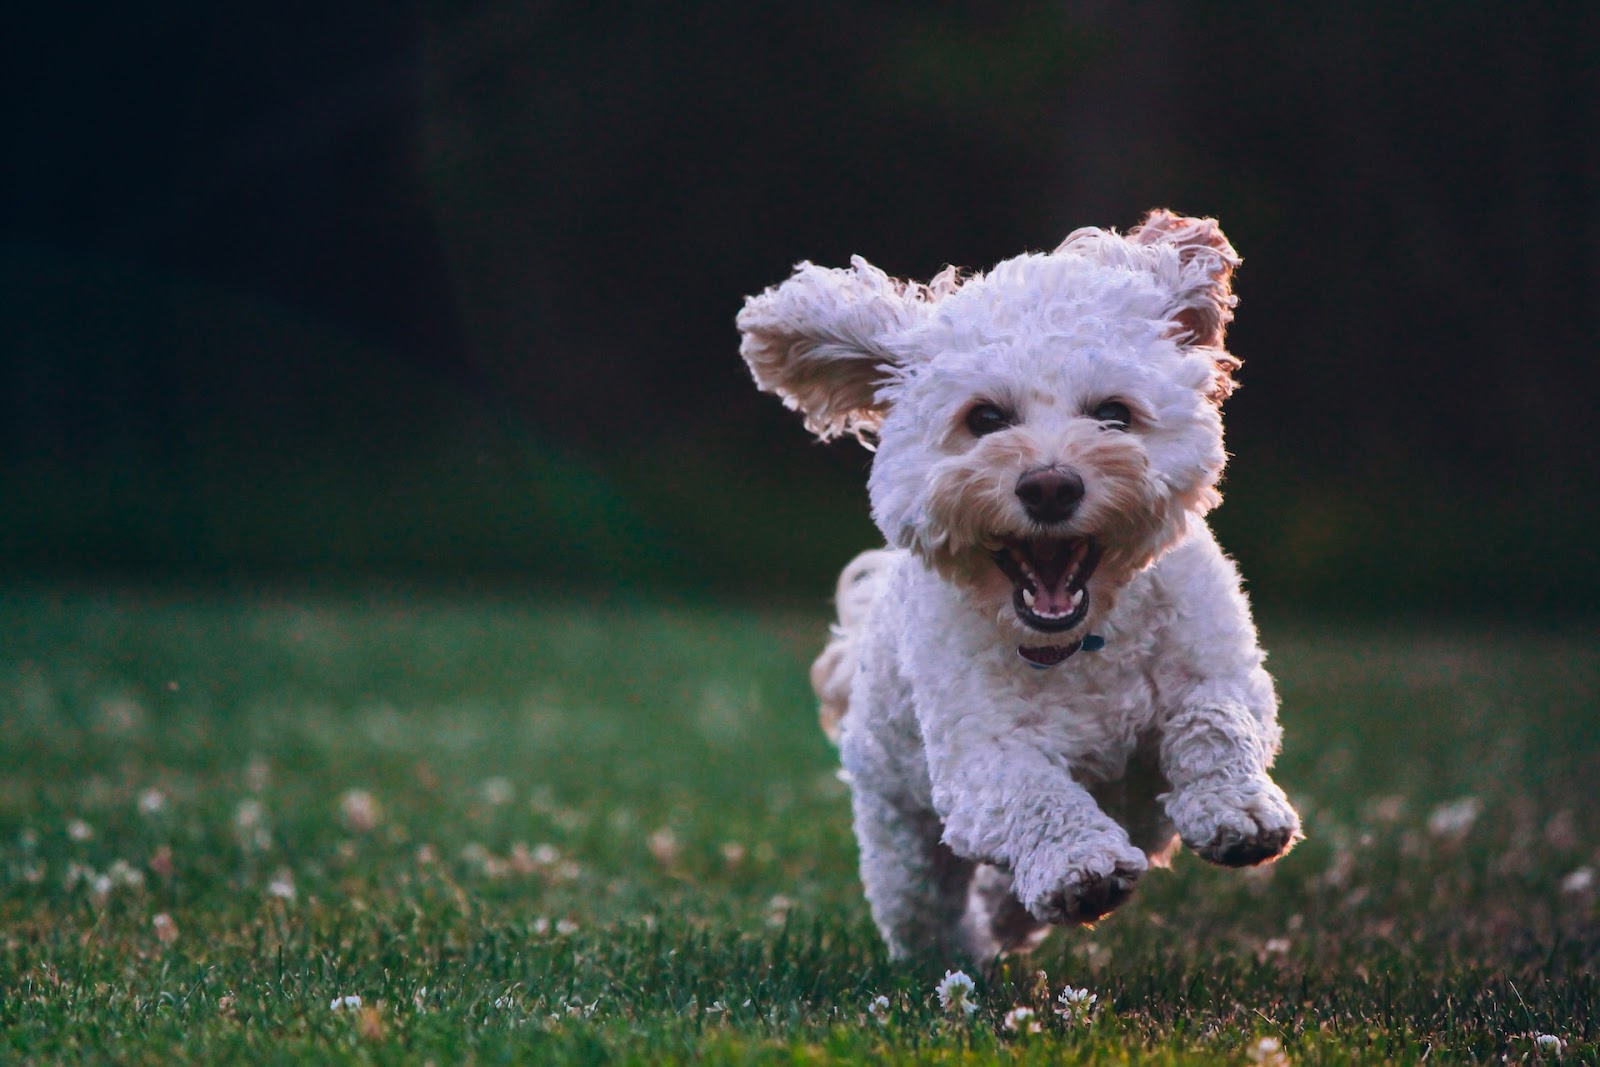 dog expressing behavior through facial expression and running outside